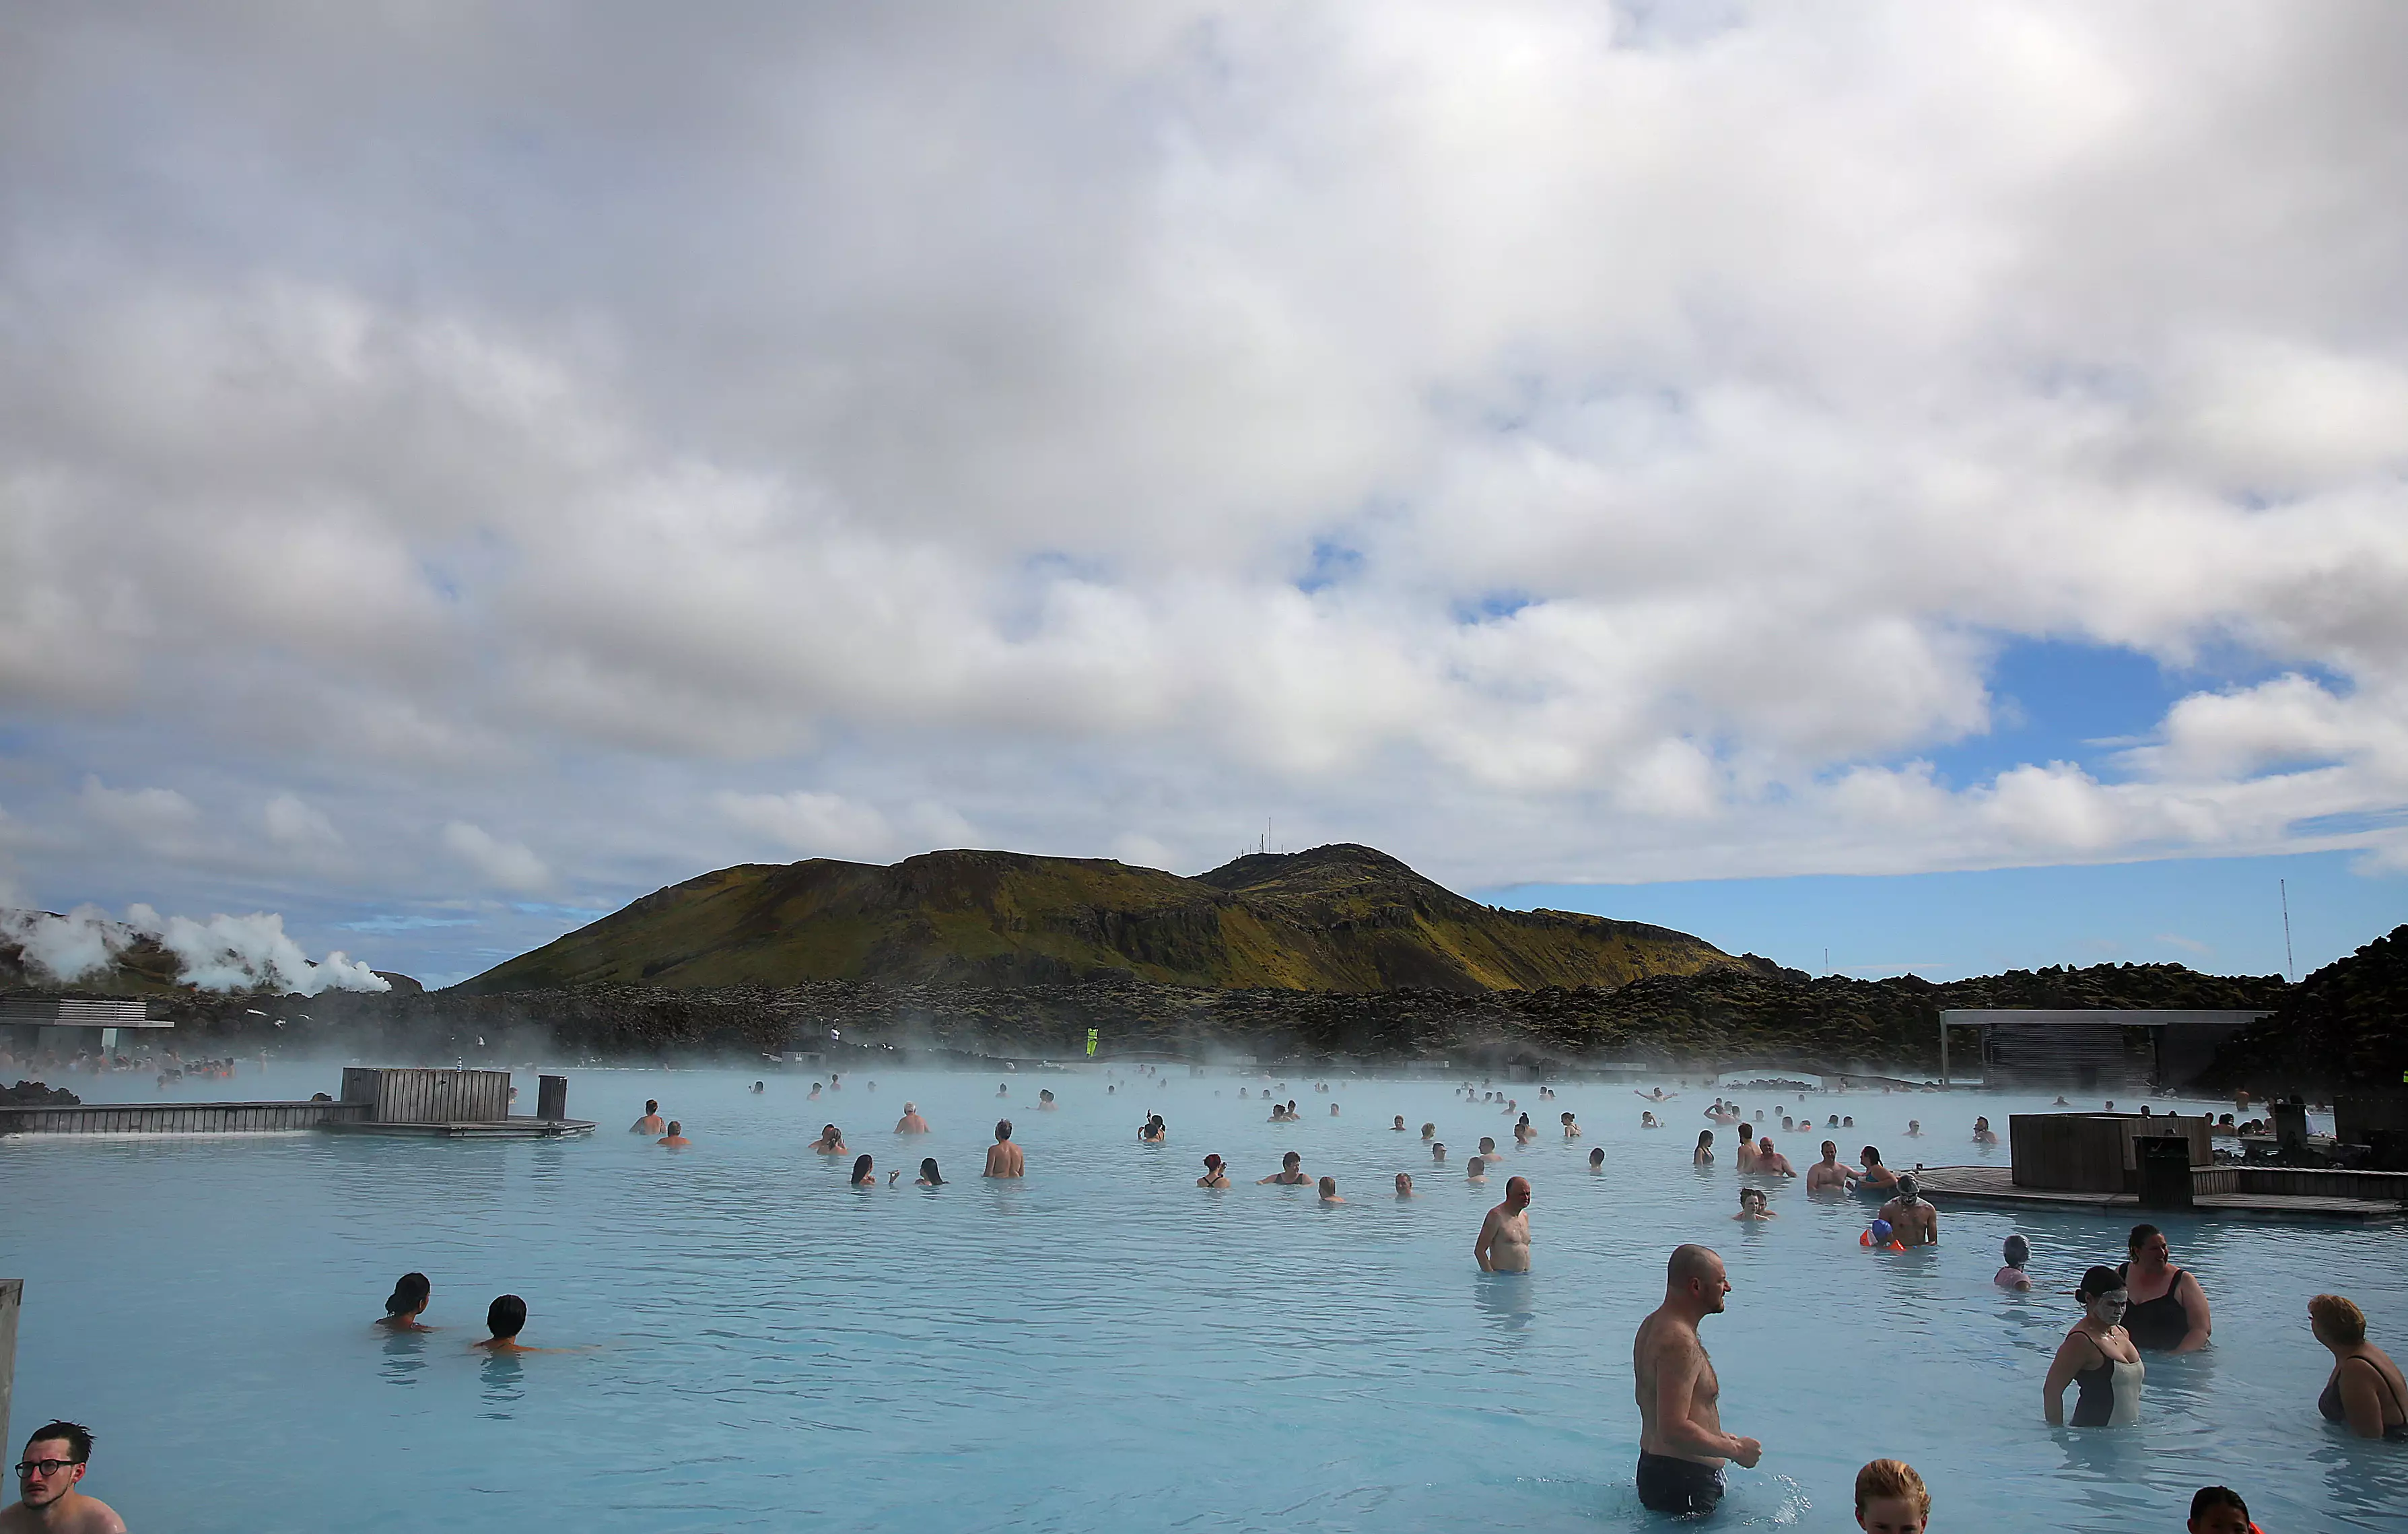 The Blue Lagoon spa in Iceland.